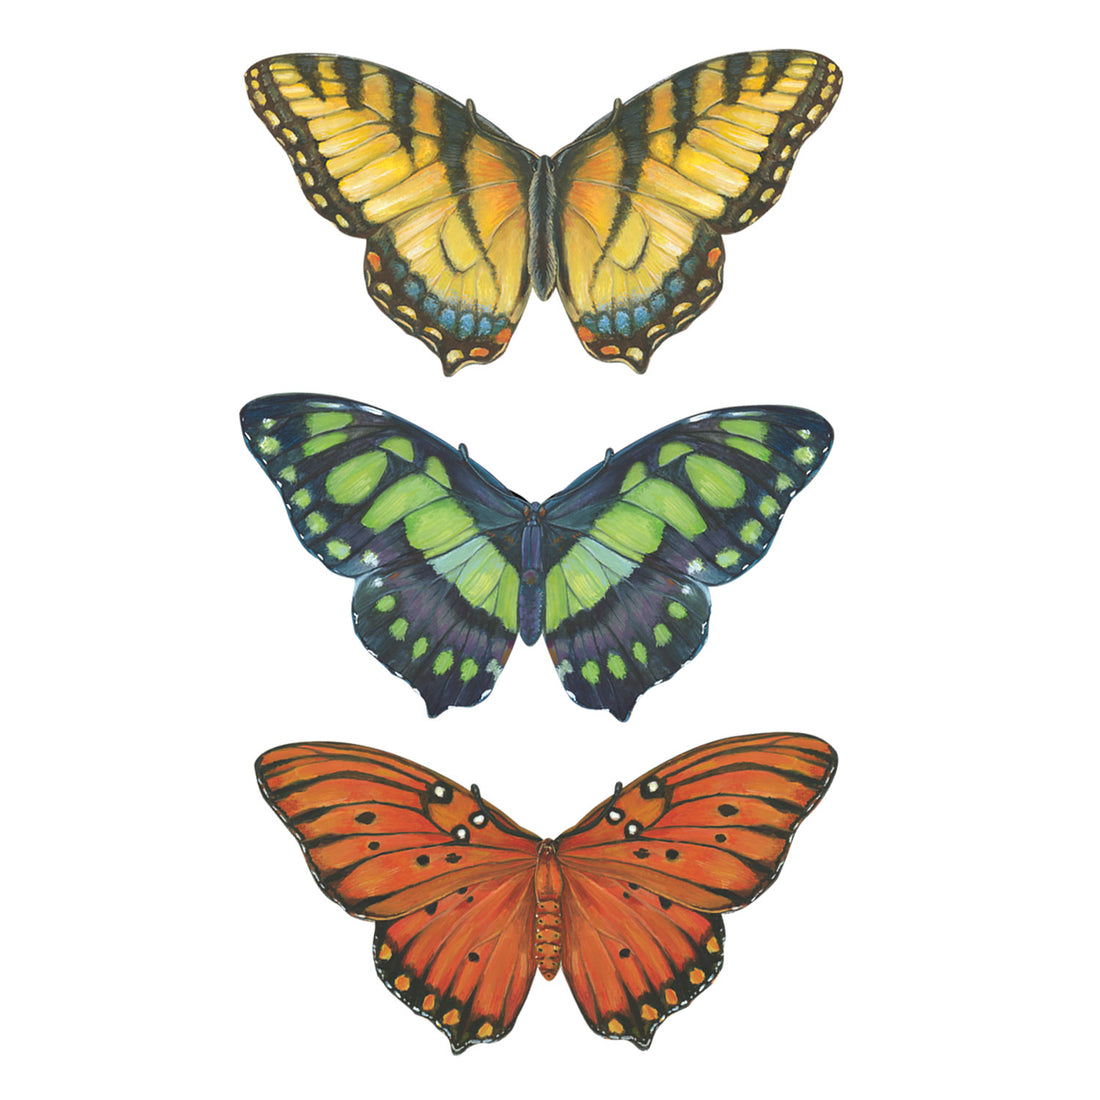 Three different die-cut illustrated butterflies: one yellow with blue and black accents, one black and green, and one deep orange with black and white accents.